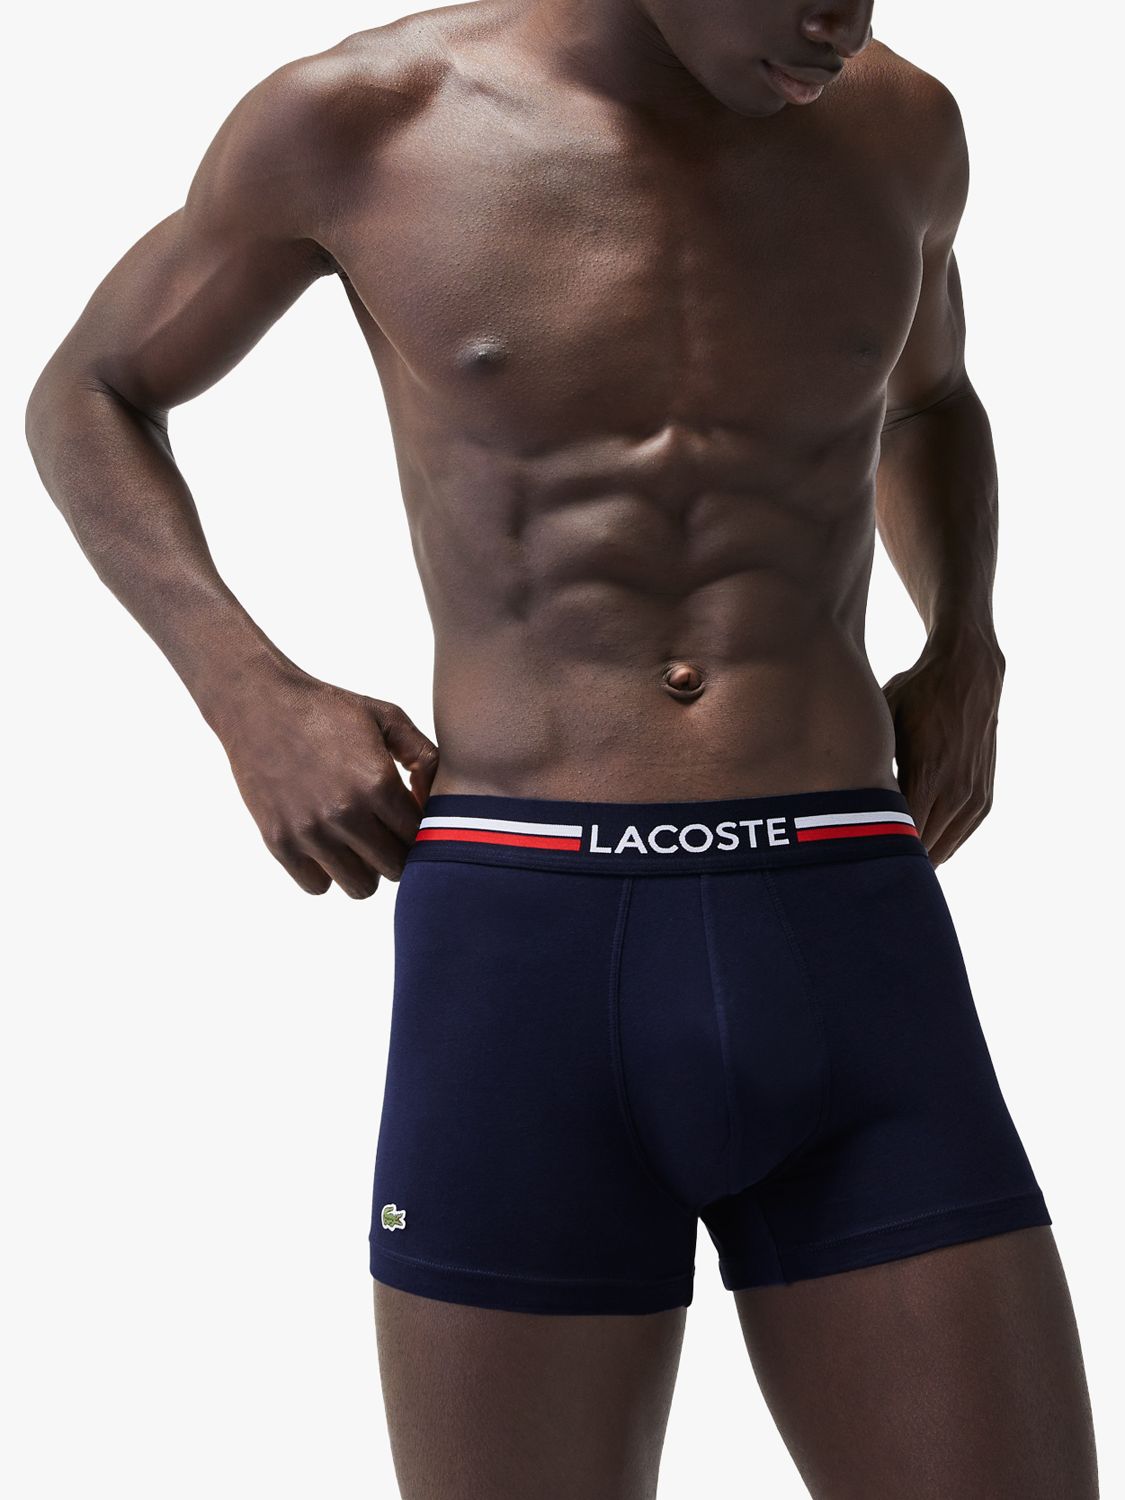 Lacoste Three Tone Waistband Iconic Trunks, Pack of 3, Navy Blue/Grey  Chine/Red at John Lewis & Partners